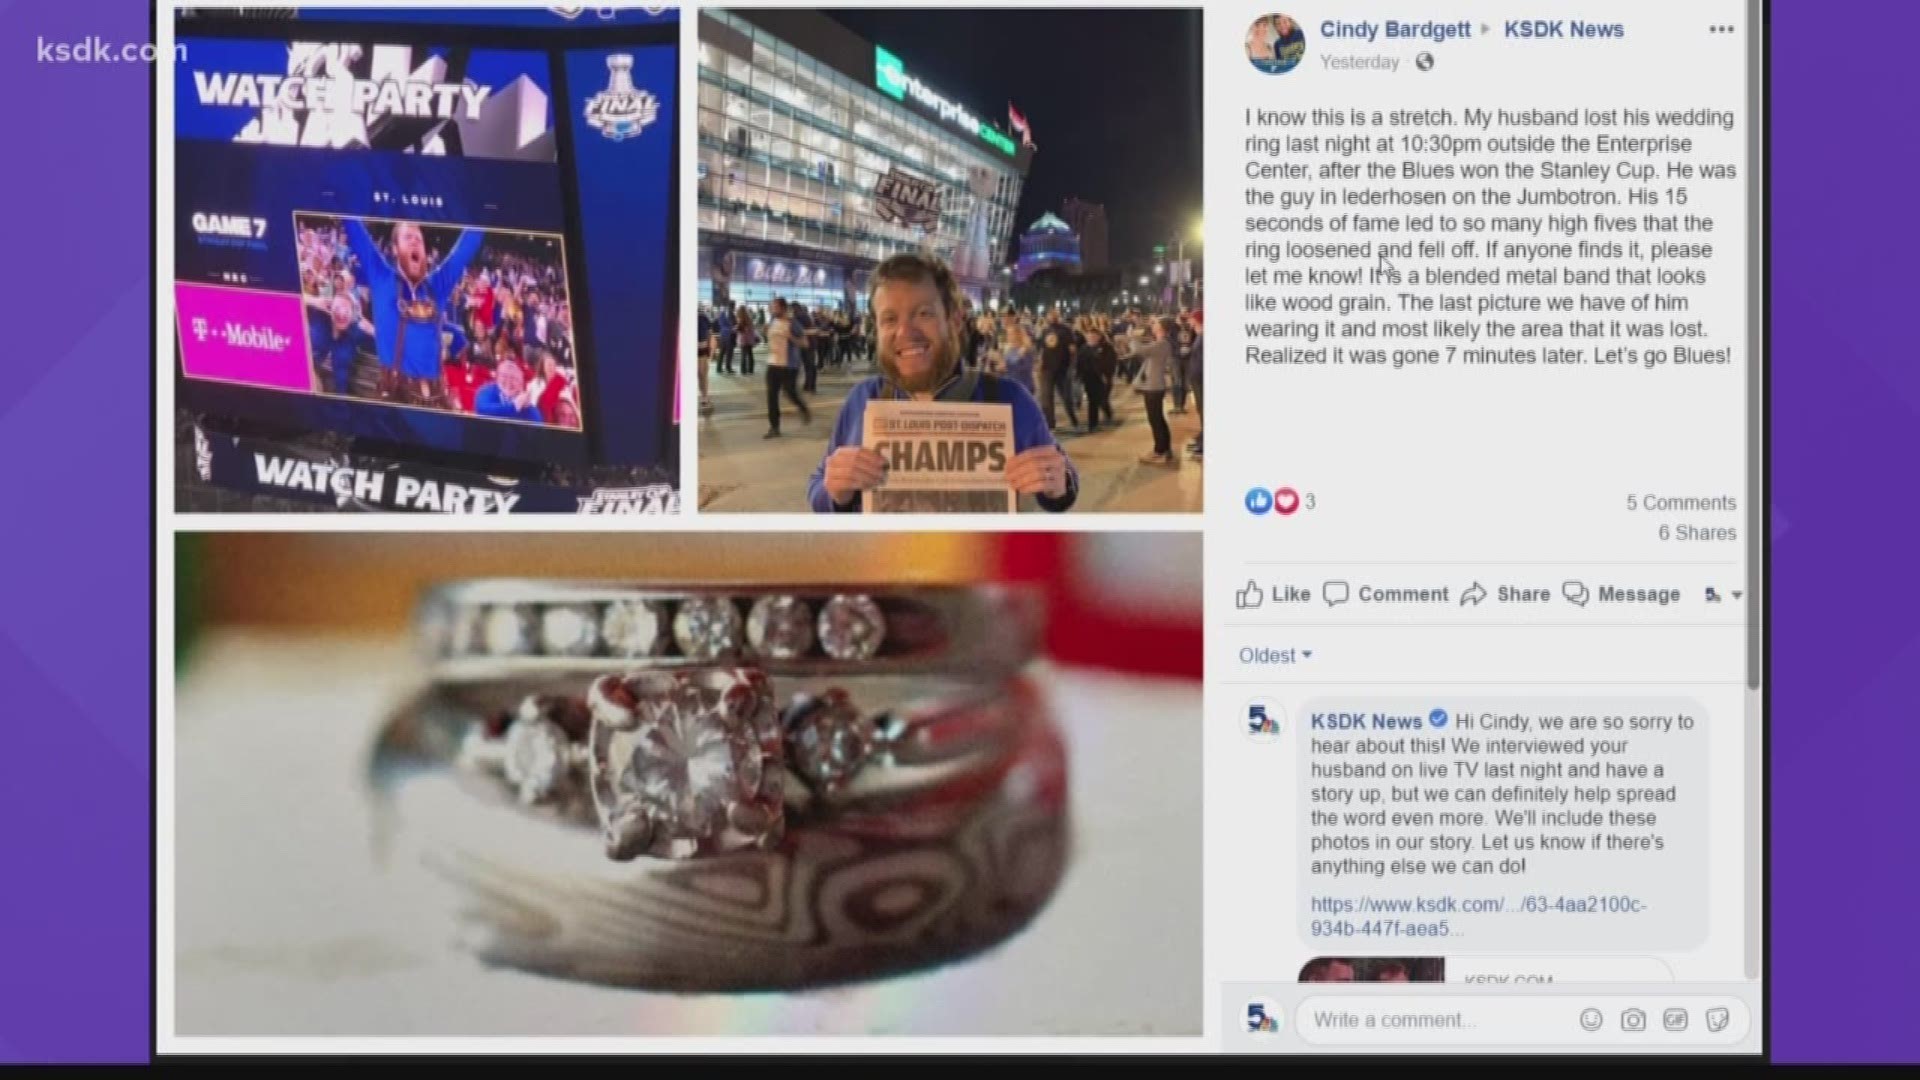 When the folks at Shane Co. heard about a Blues fan who lost his wedding ring after high-fiving people after Game 7, they decided to step in.